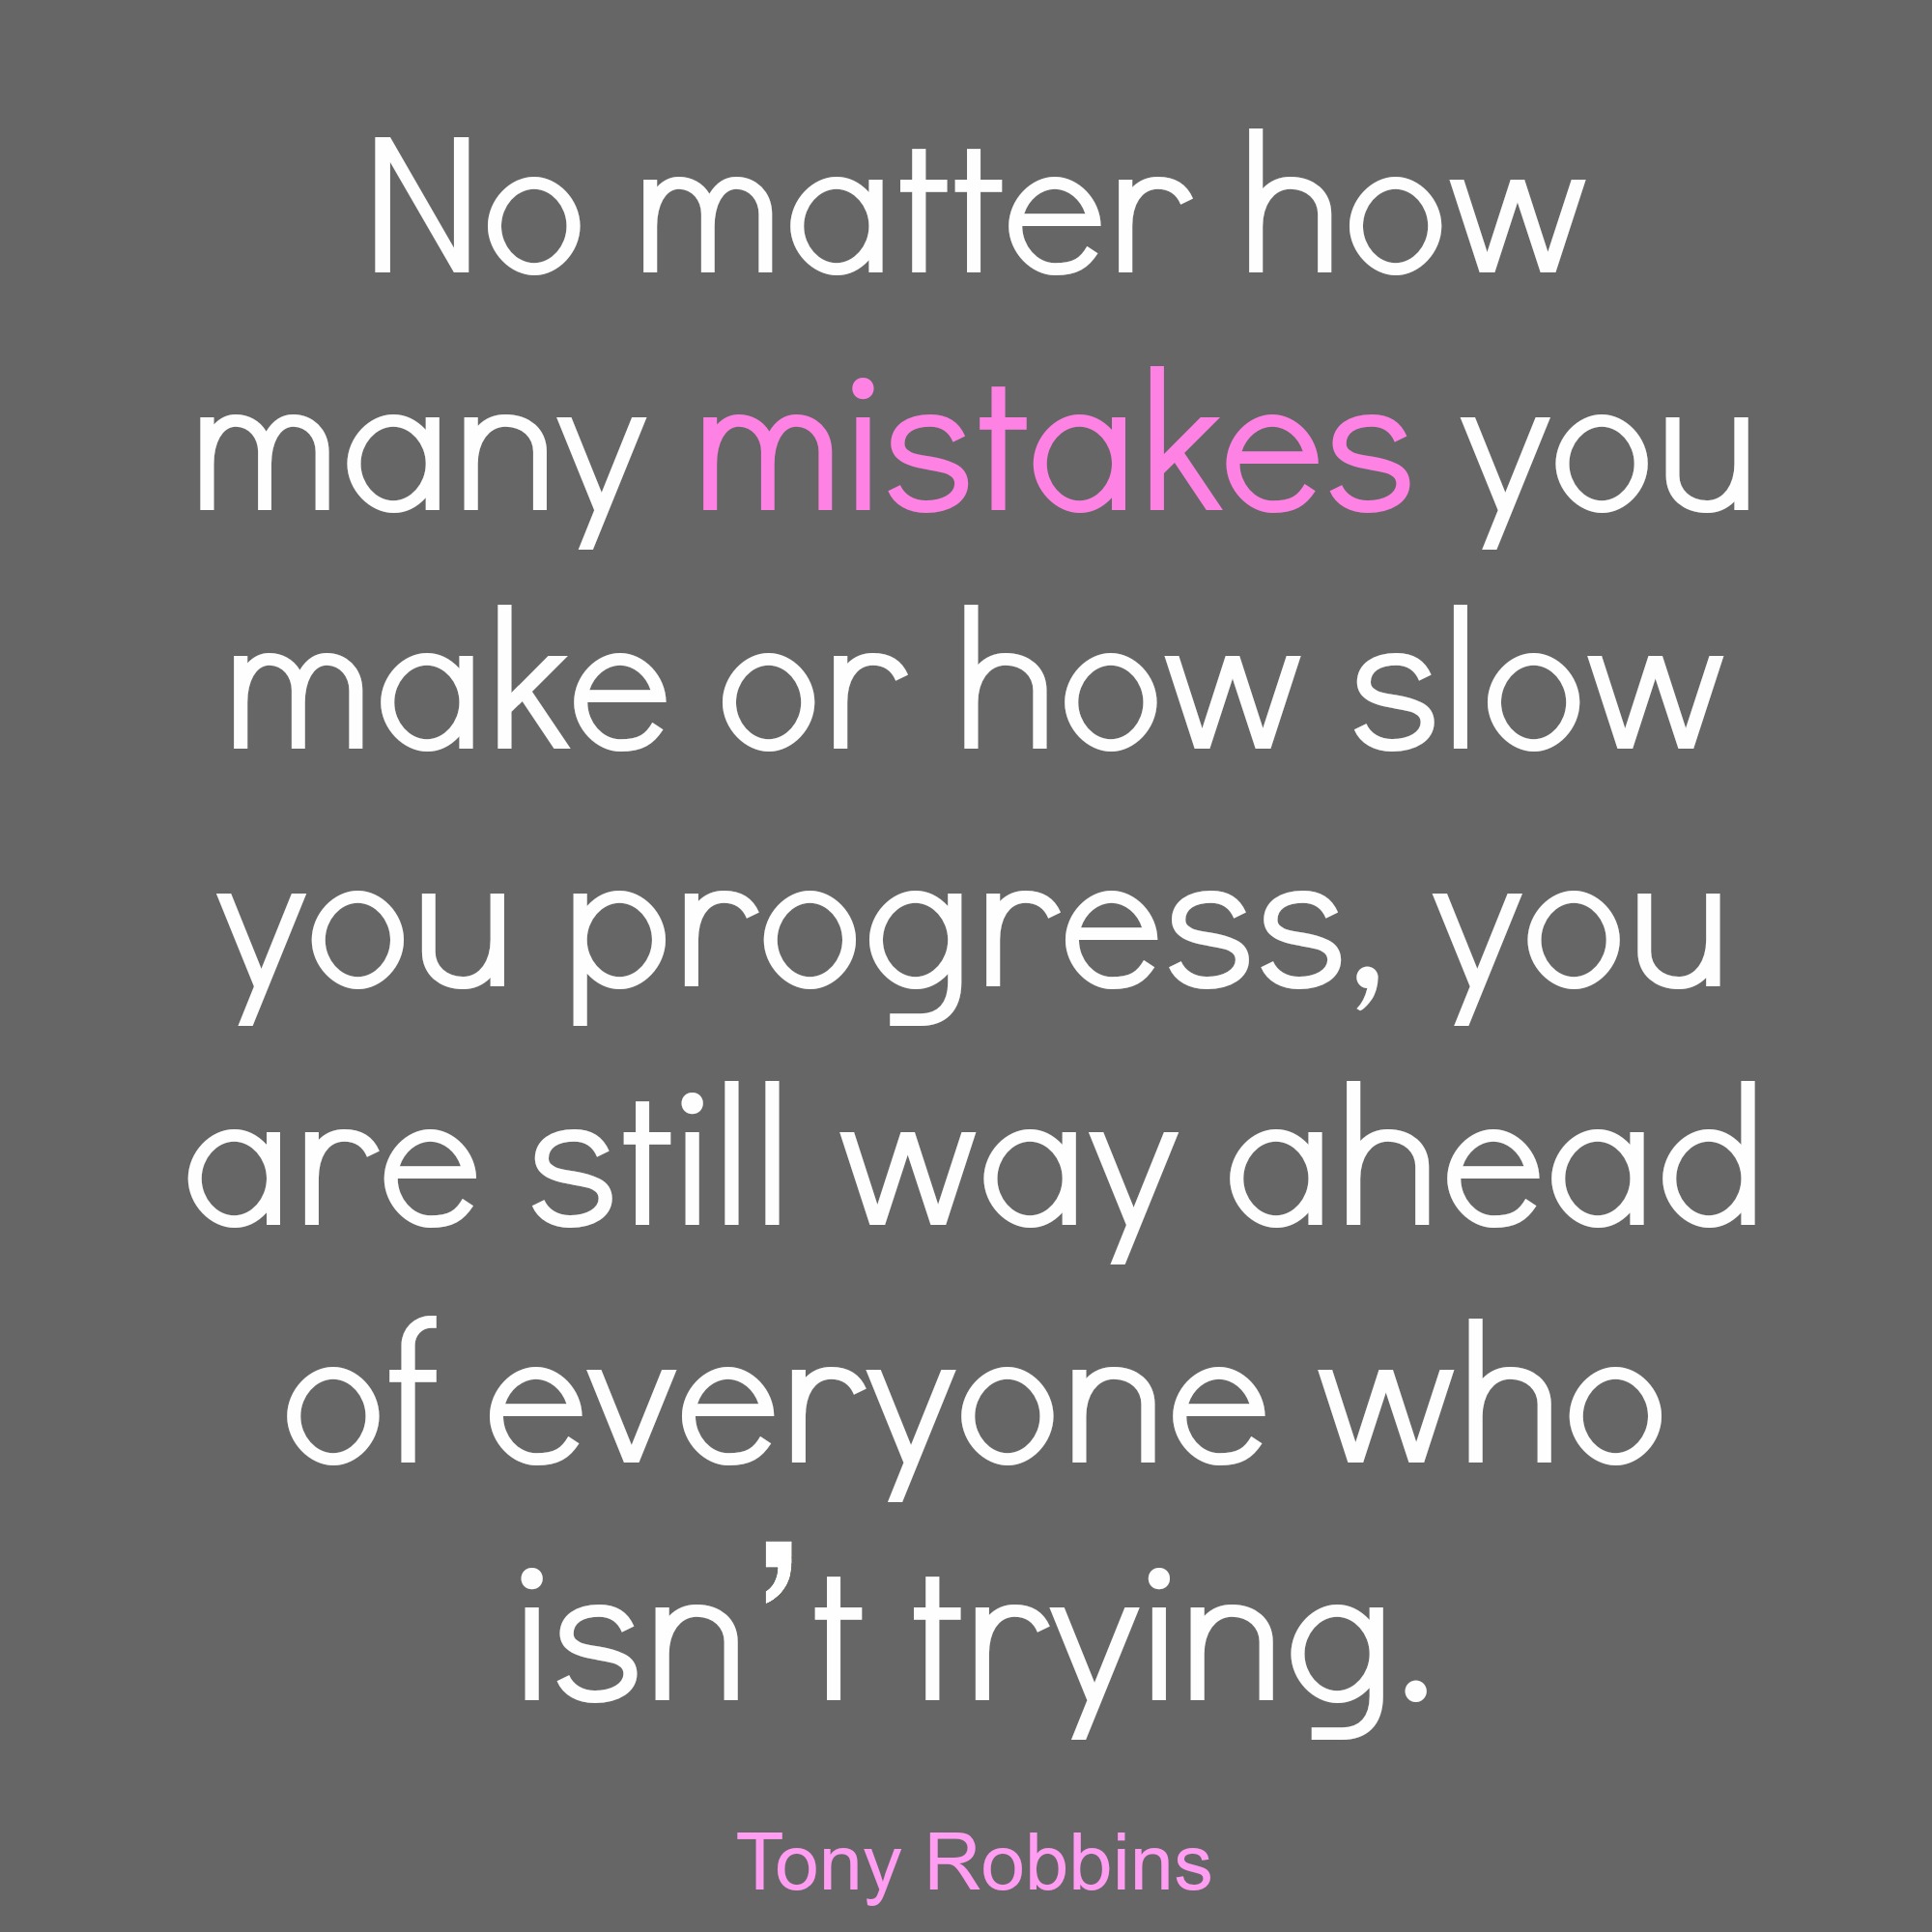 No matter how many mistakes you make or how slow you progress, you are still way ahead of everyone who isn't trying. Tony Robbins